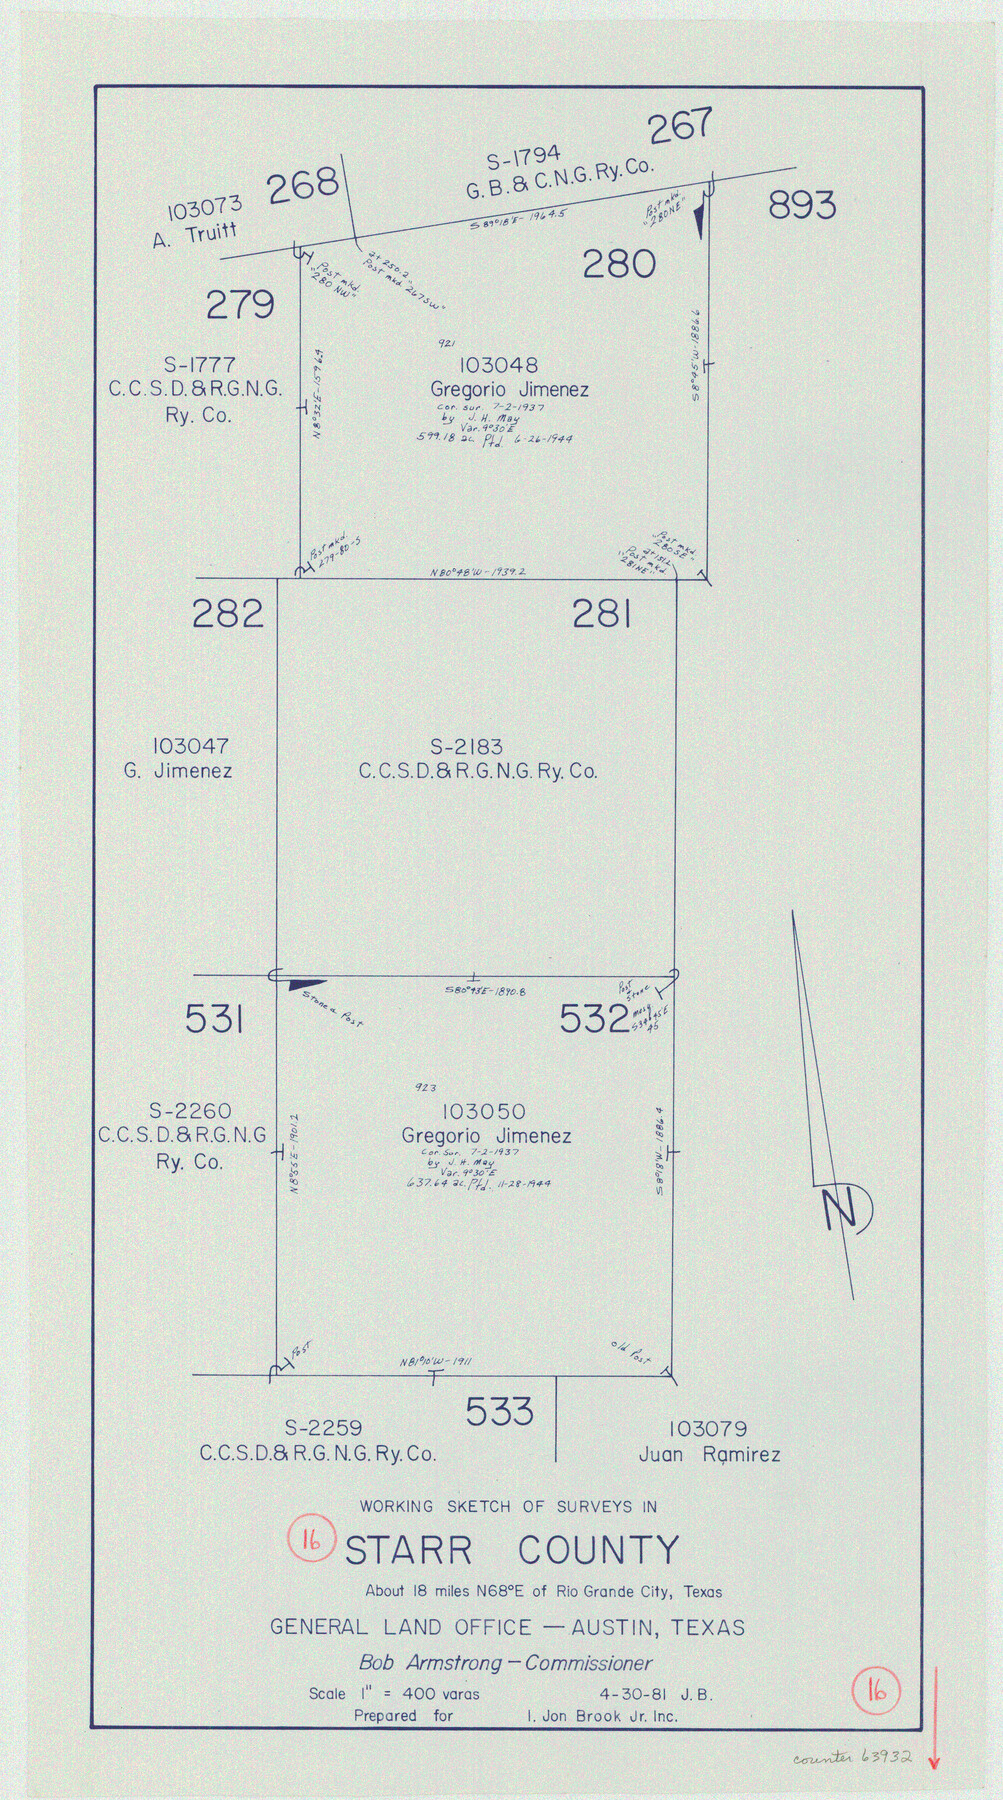 63932, Starr County Working Sketch 16, General Map Collection